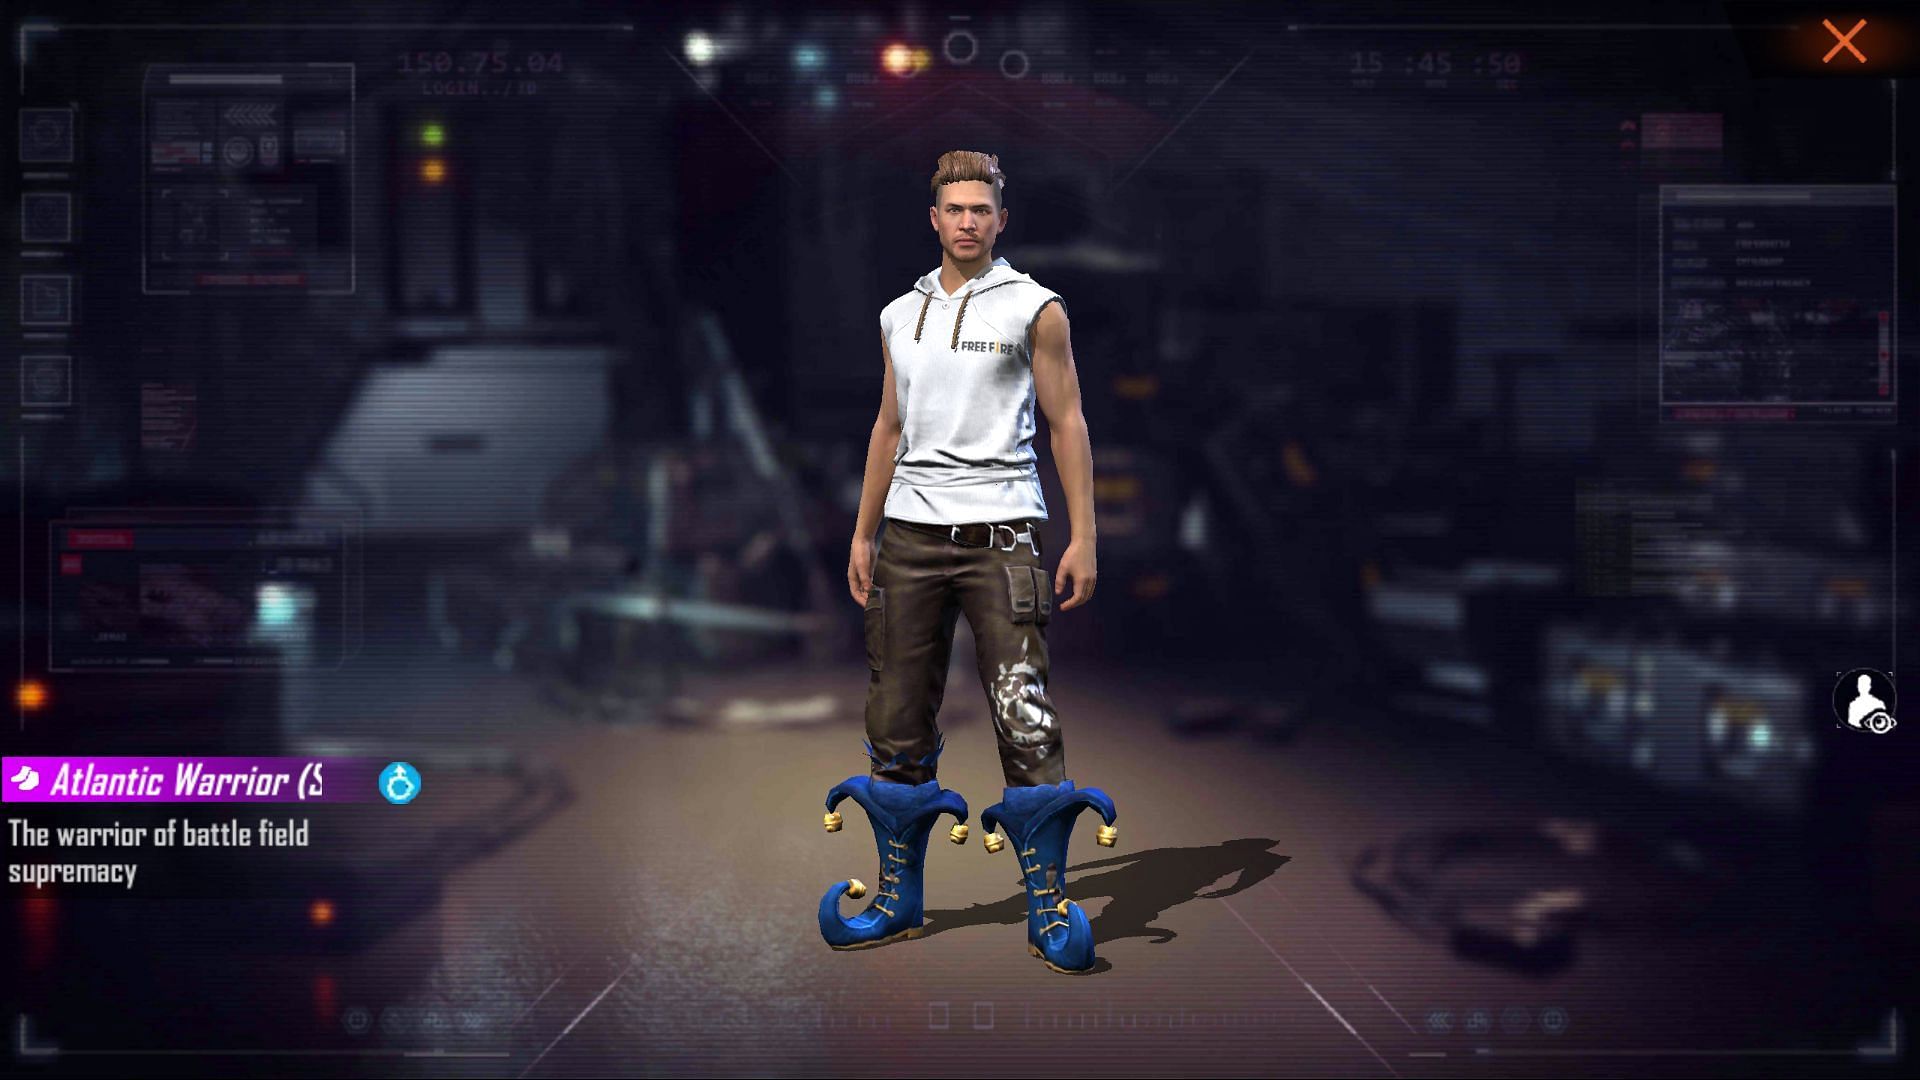 These are the Atlantic Warrior (Shoes) (Image via Garena)